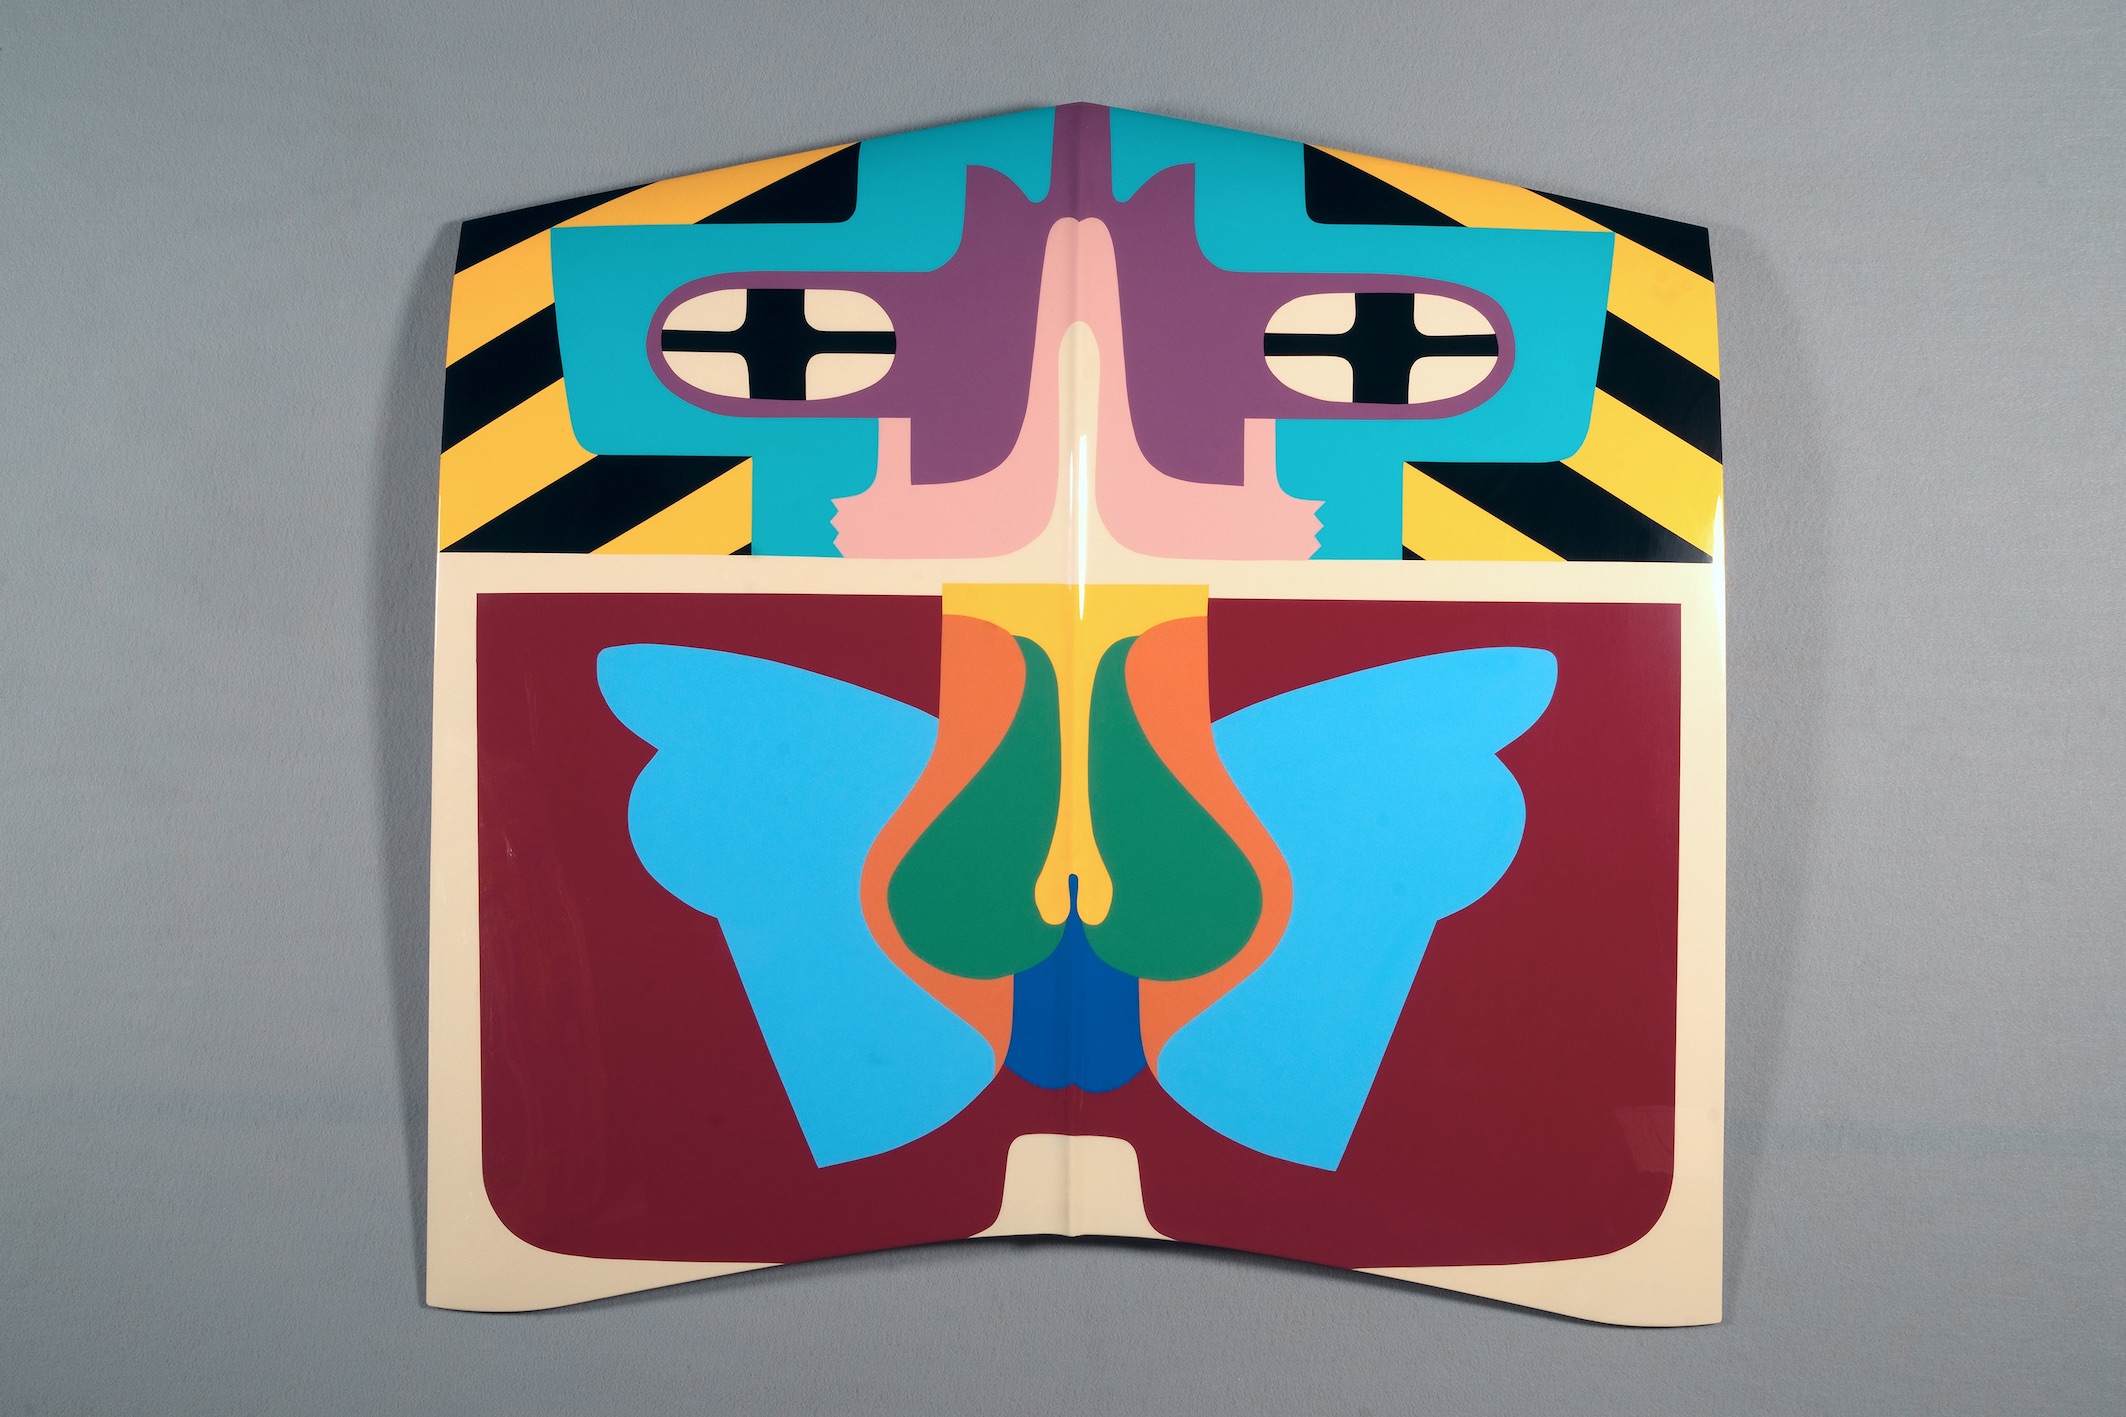 Judy Chicago, Flight Hood, 1965/2011; Sprayed automotive lacquer on car hood, 43 x 43 x 4 1/8 in;© Judy Chicago/Artists Rights Society (ARS), New York. Photo Donald Woodman/ARS NY Courtesy Salon 94, New York, and Jessica Silverman Gallery, San Francisco